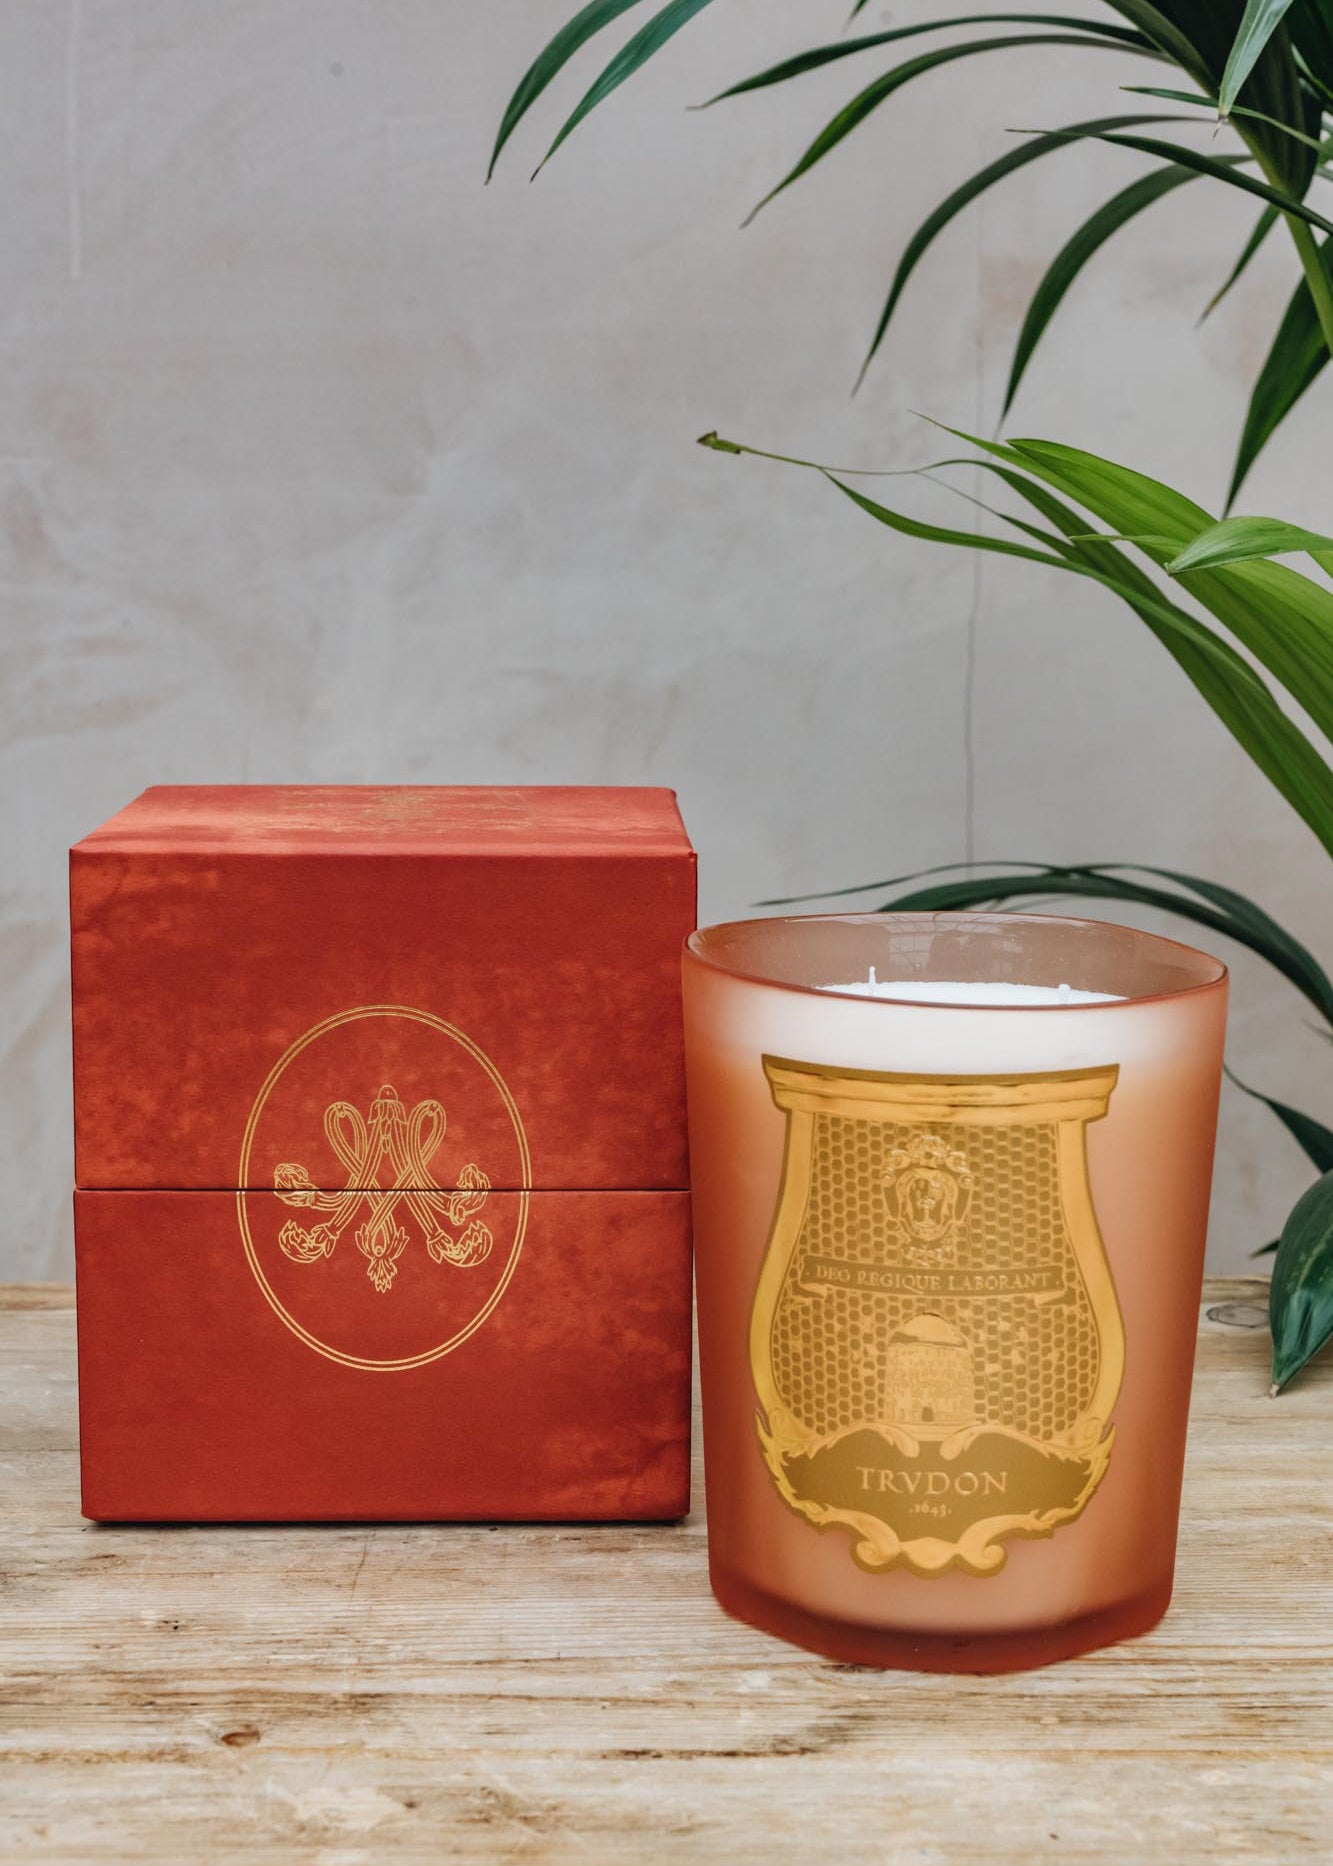 Trudon Large Classic Candle in Tuileries